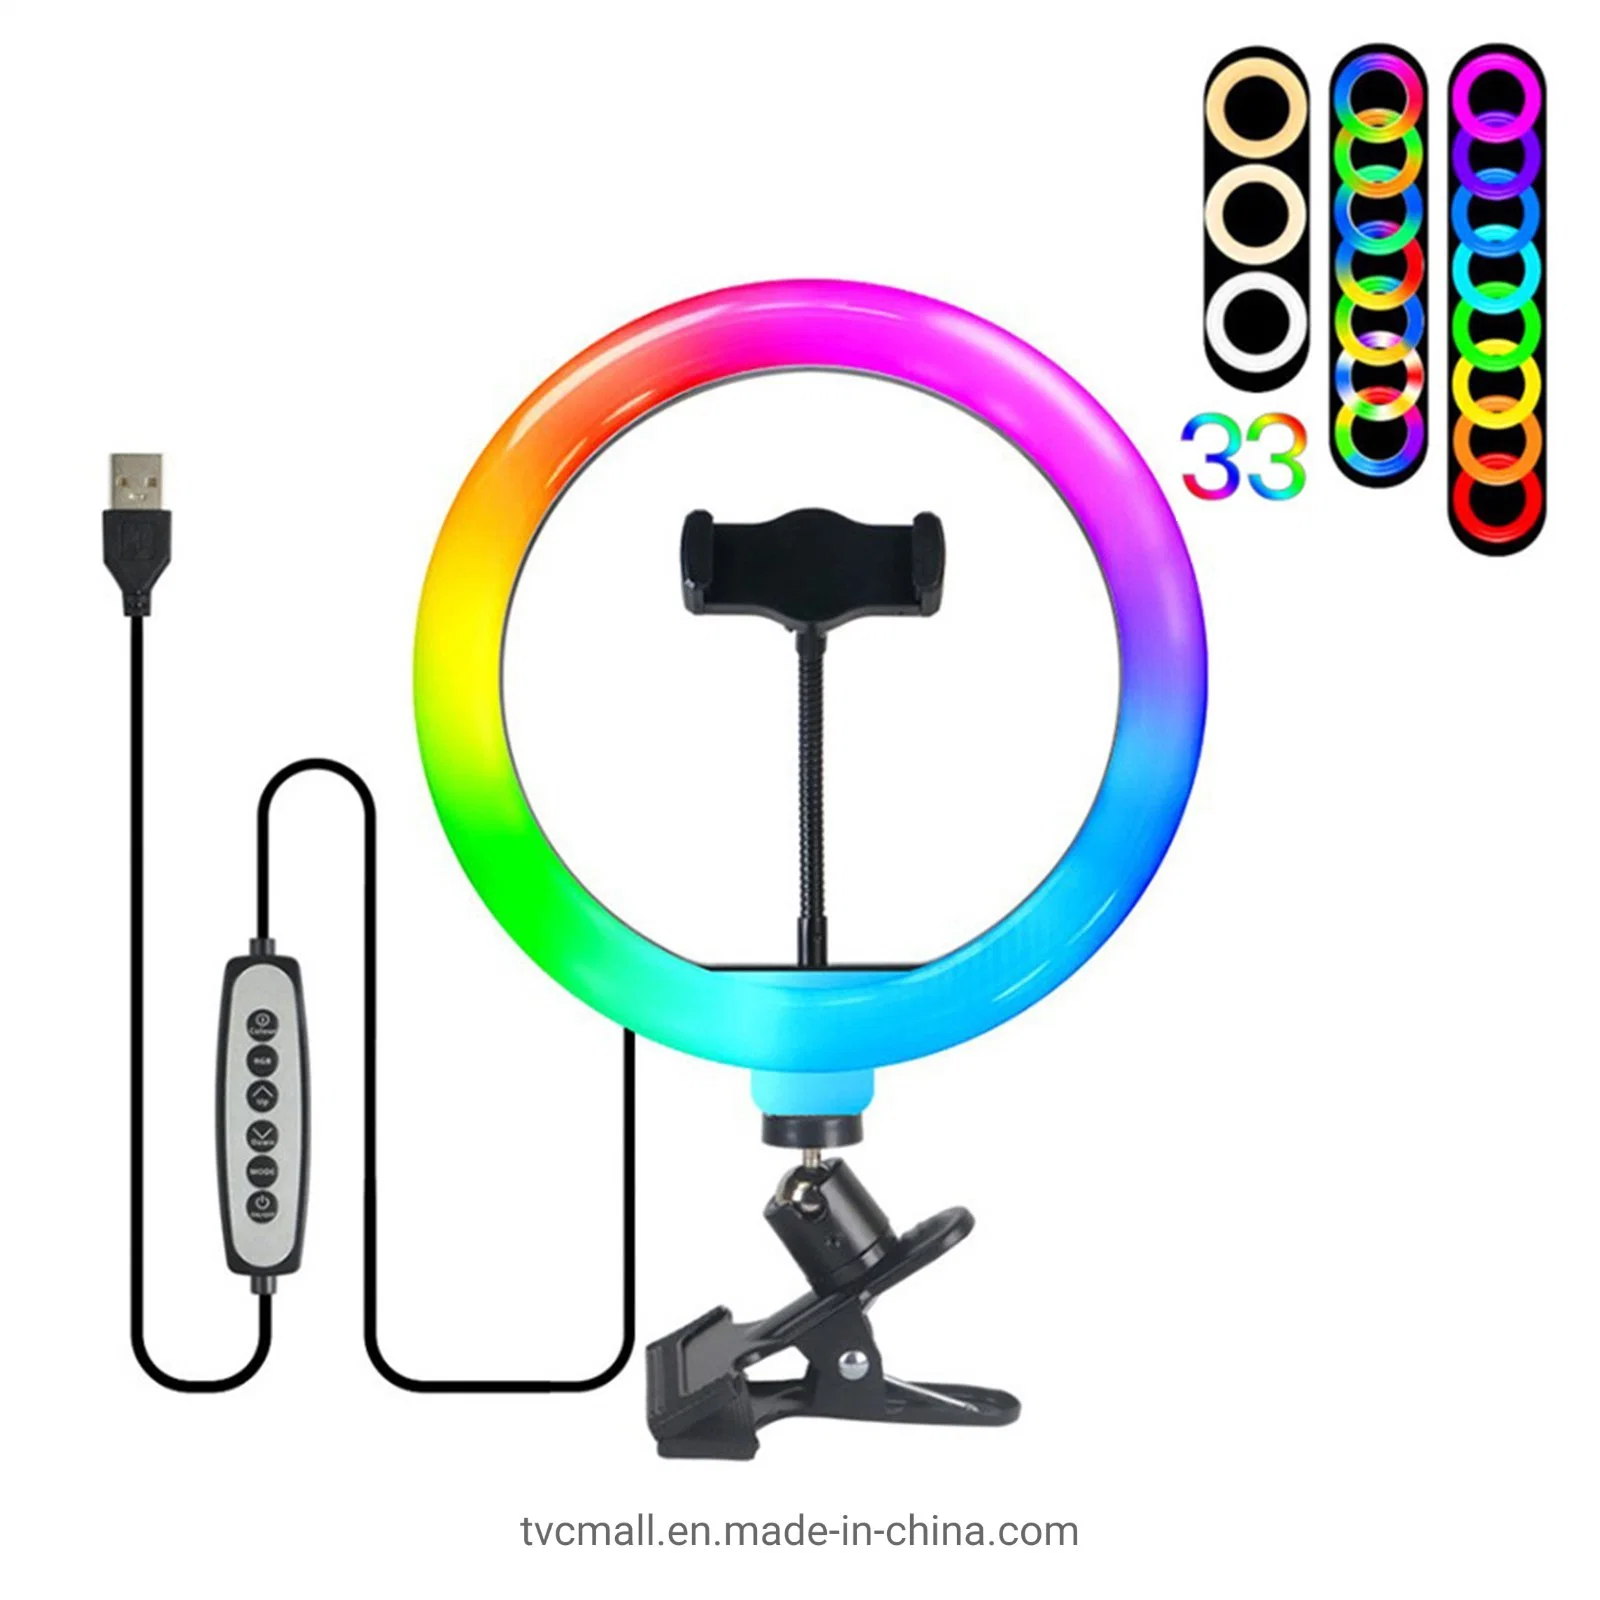 10 Inch RGB LED Video Light 360-Degree Rotating Selfie Ring Light Desktop Live-Stream Photography Fill Lamp with Clamp for Shooting